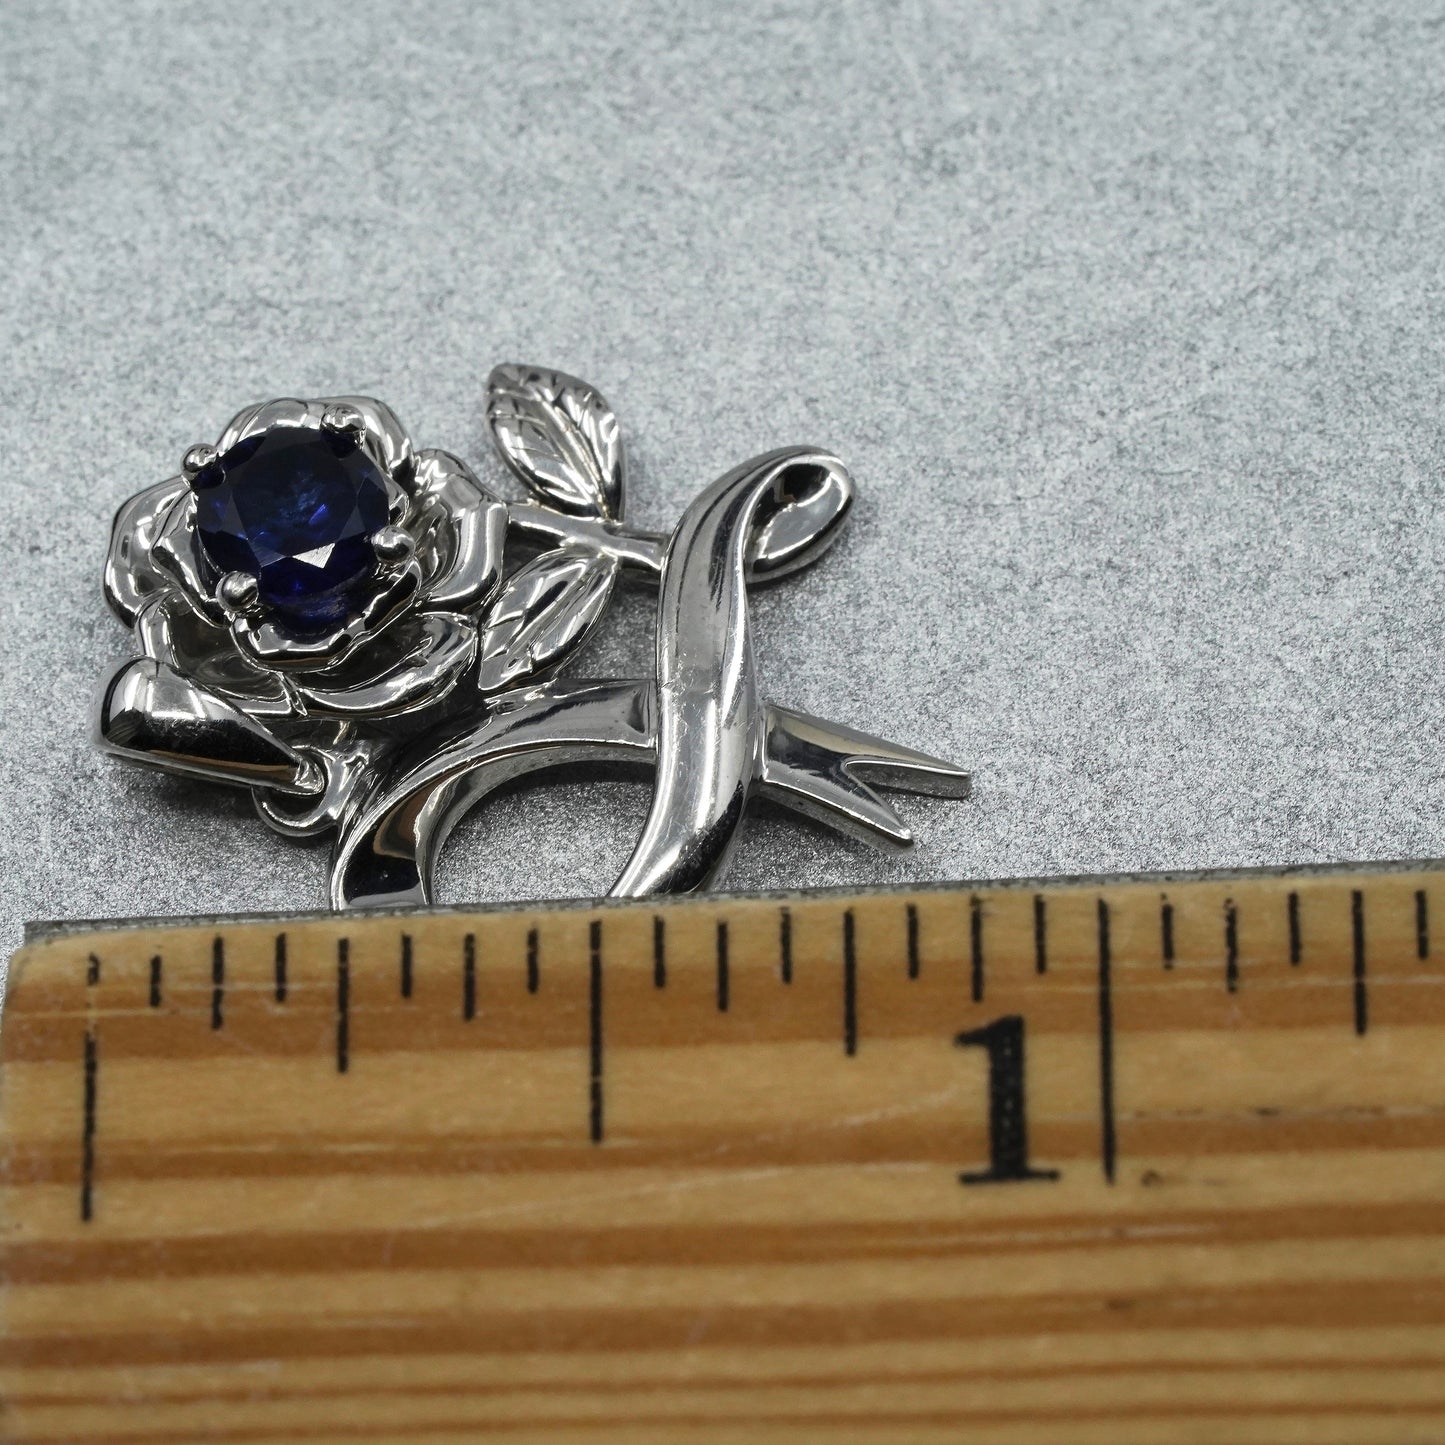 Vintage sterling 925 silver handmade flower pendant with sapphire